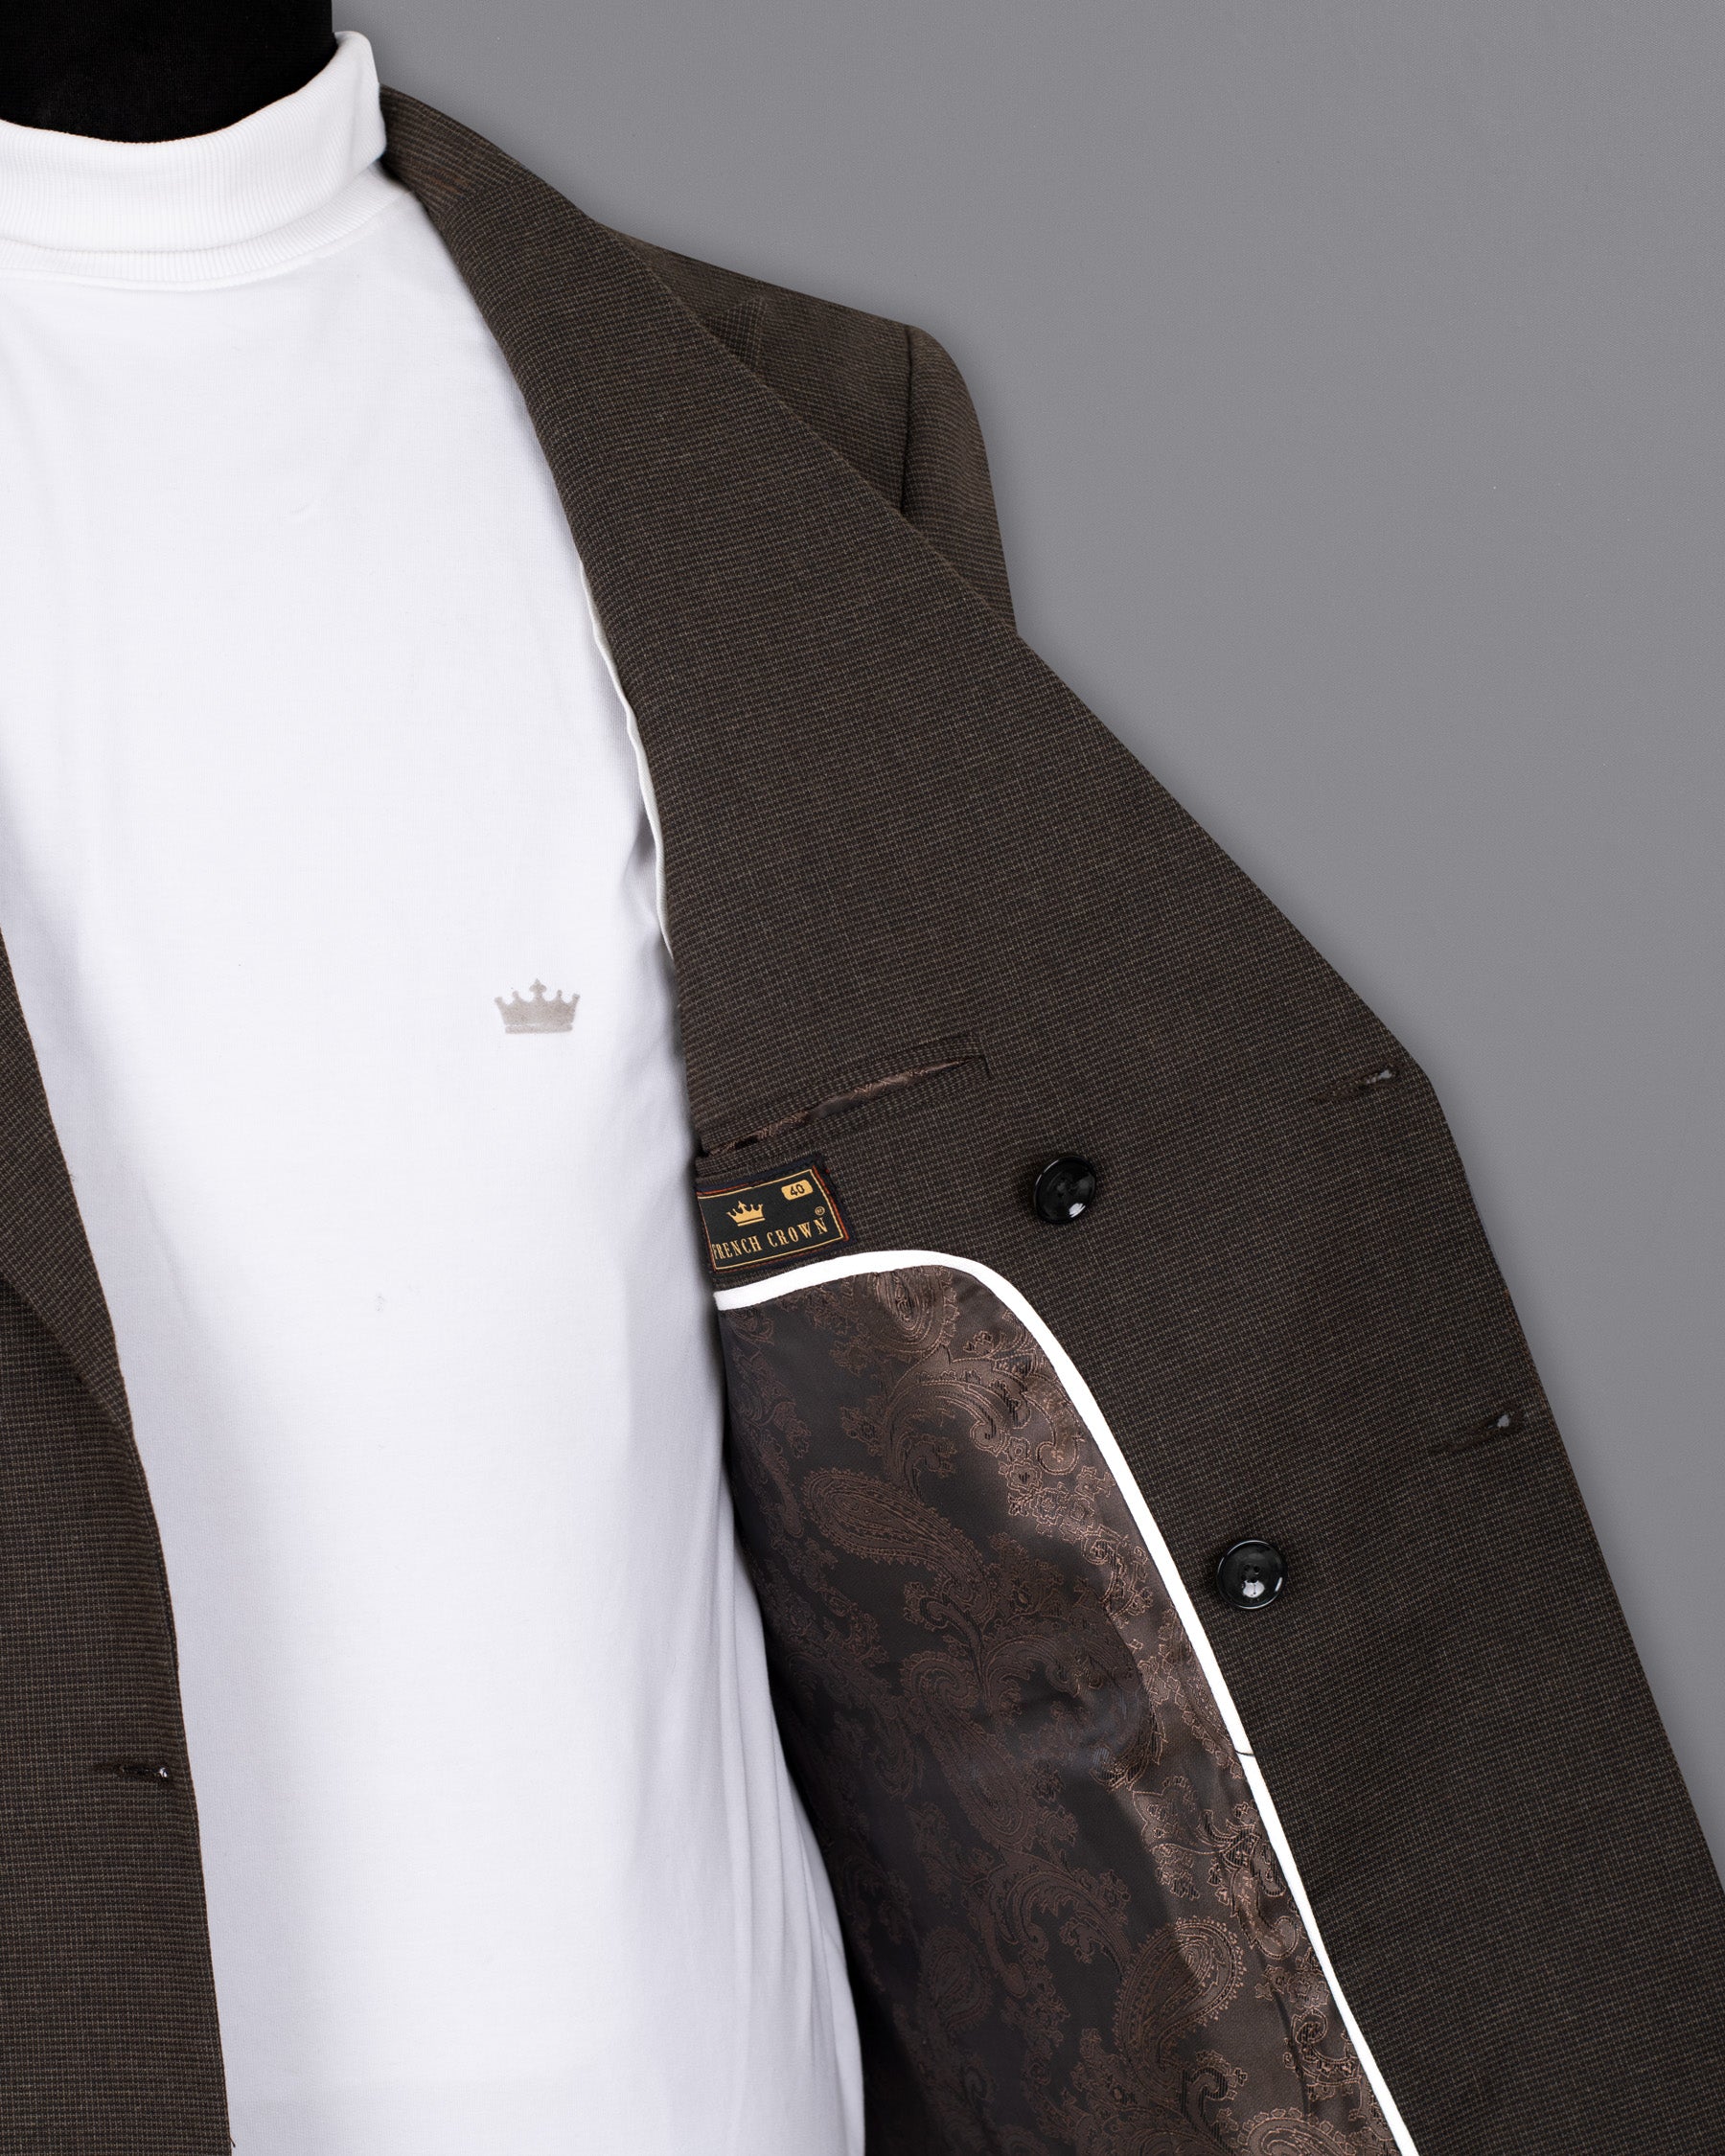 Coffee Bean Brown Double Breasted Premium Cotton Blazer BL1328-DB-36, BL1328-DB-38, BL1328-DB-40, BL1328-DB-42, BL1328-DB-44, BL1328-DB-46, BL1328-DB-48, BL1328-DB-50, BL1328-DB-52, BL1328-DB-54, BL1328-DB-56, BL1328-DB-58, BL1328-DB-60